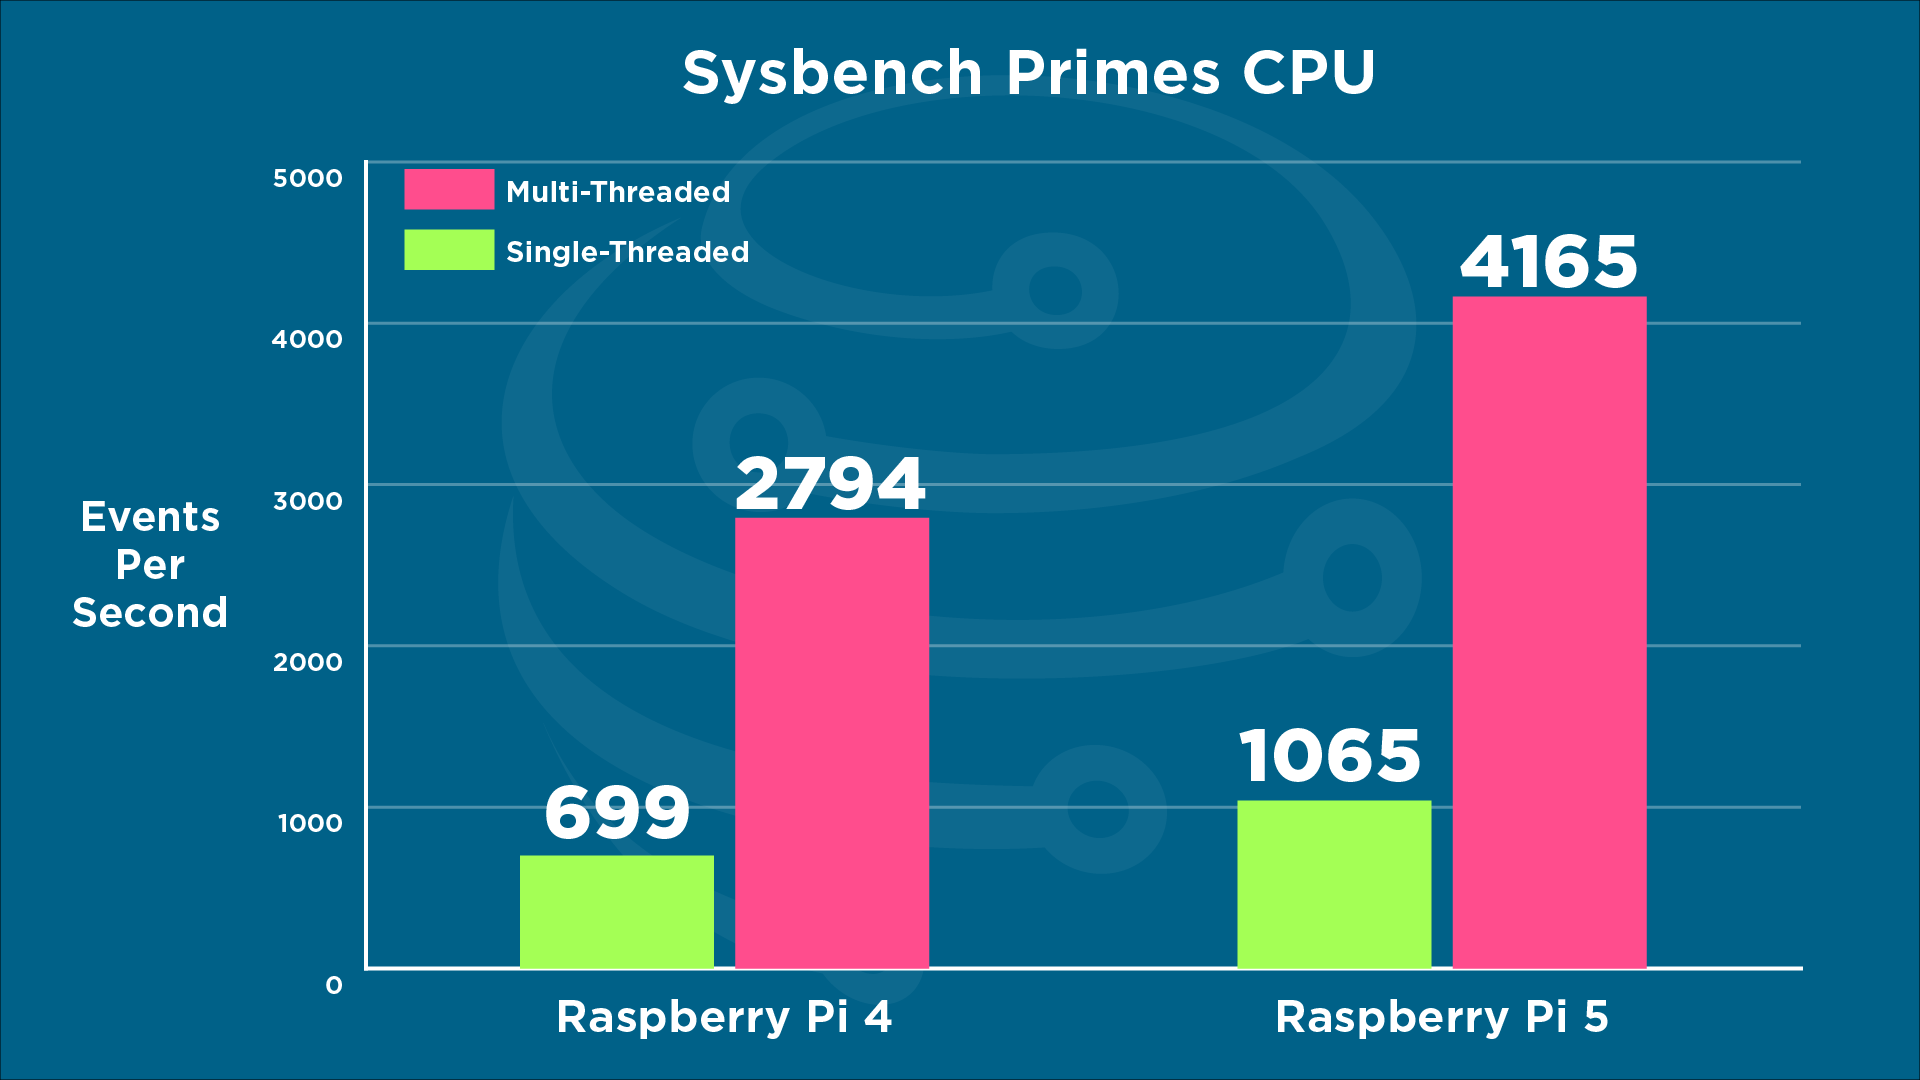 Raspberry Pi 5 Vs Raspberry Pi 4: The Detailed Differences & Comparisons